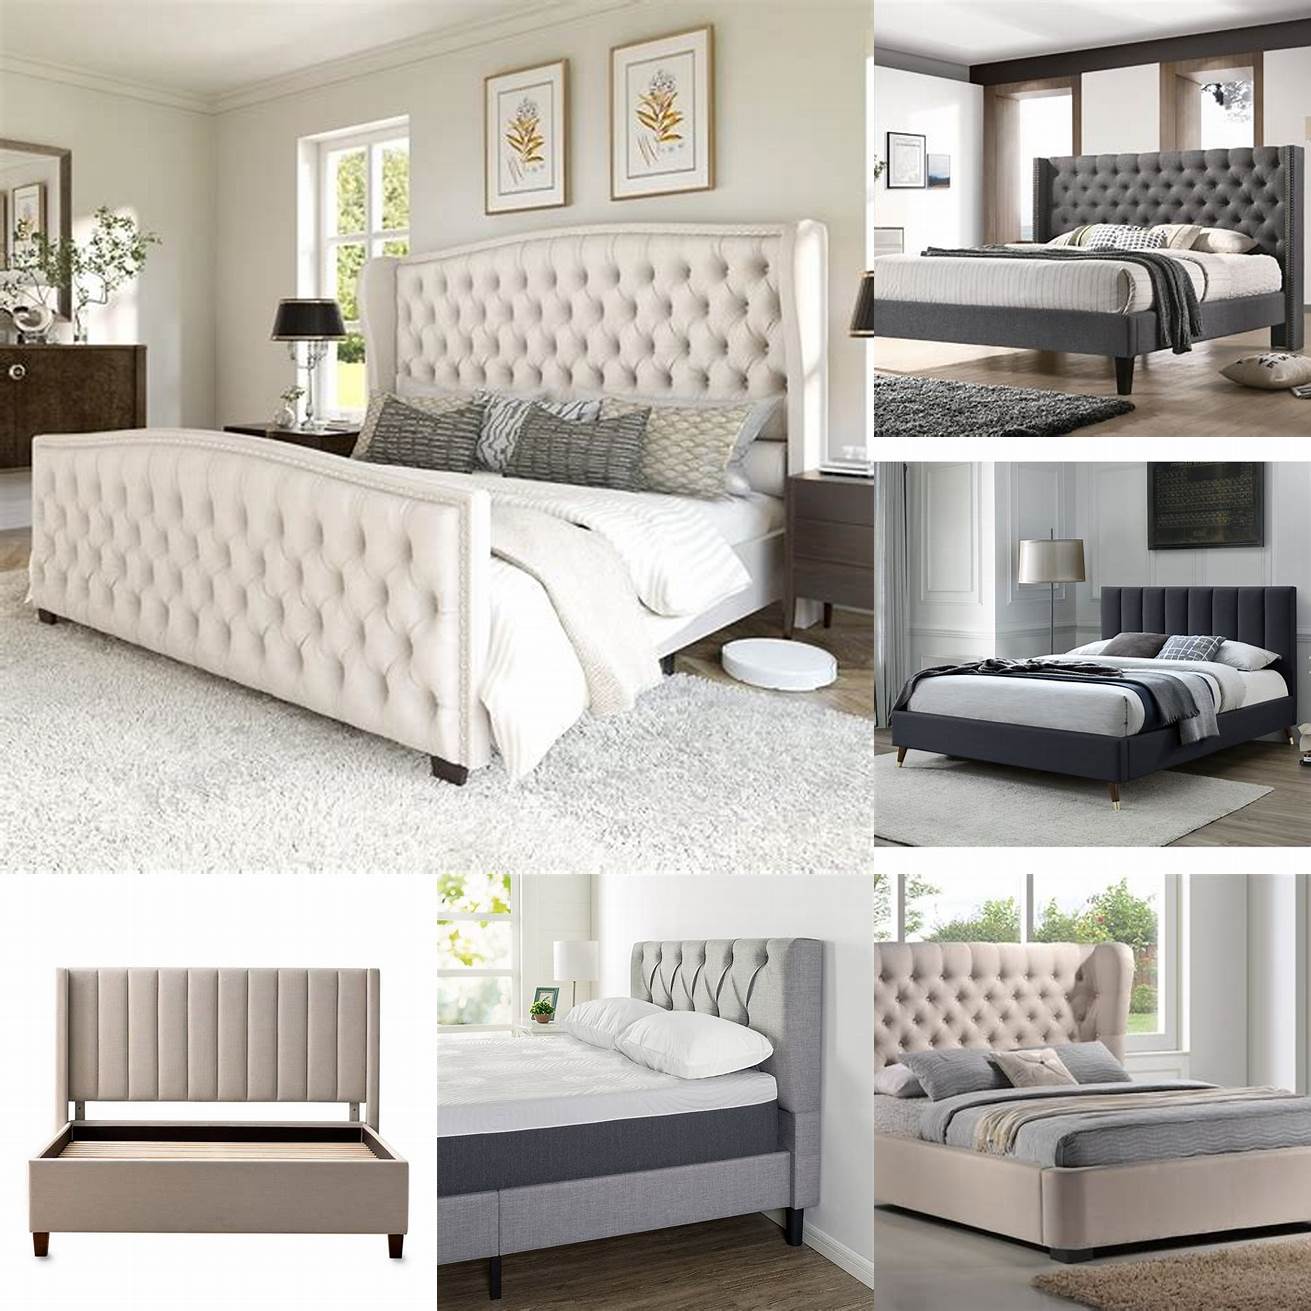 A picture of an Upholstered Platform Bed King with a tufted headboard